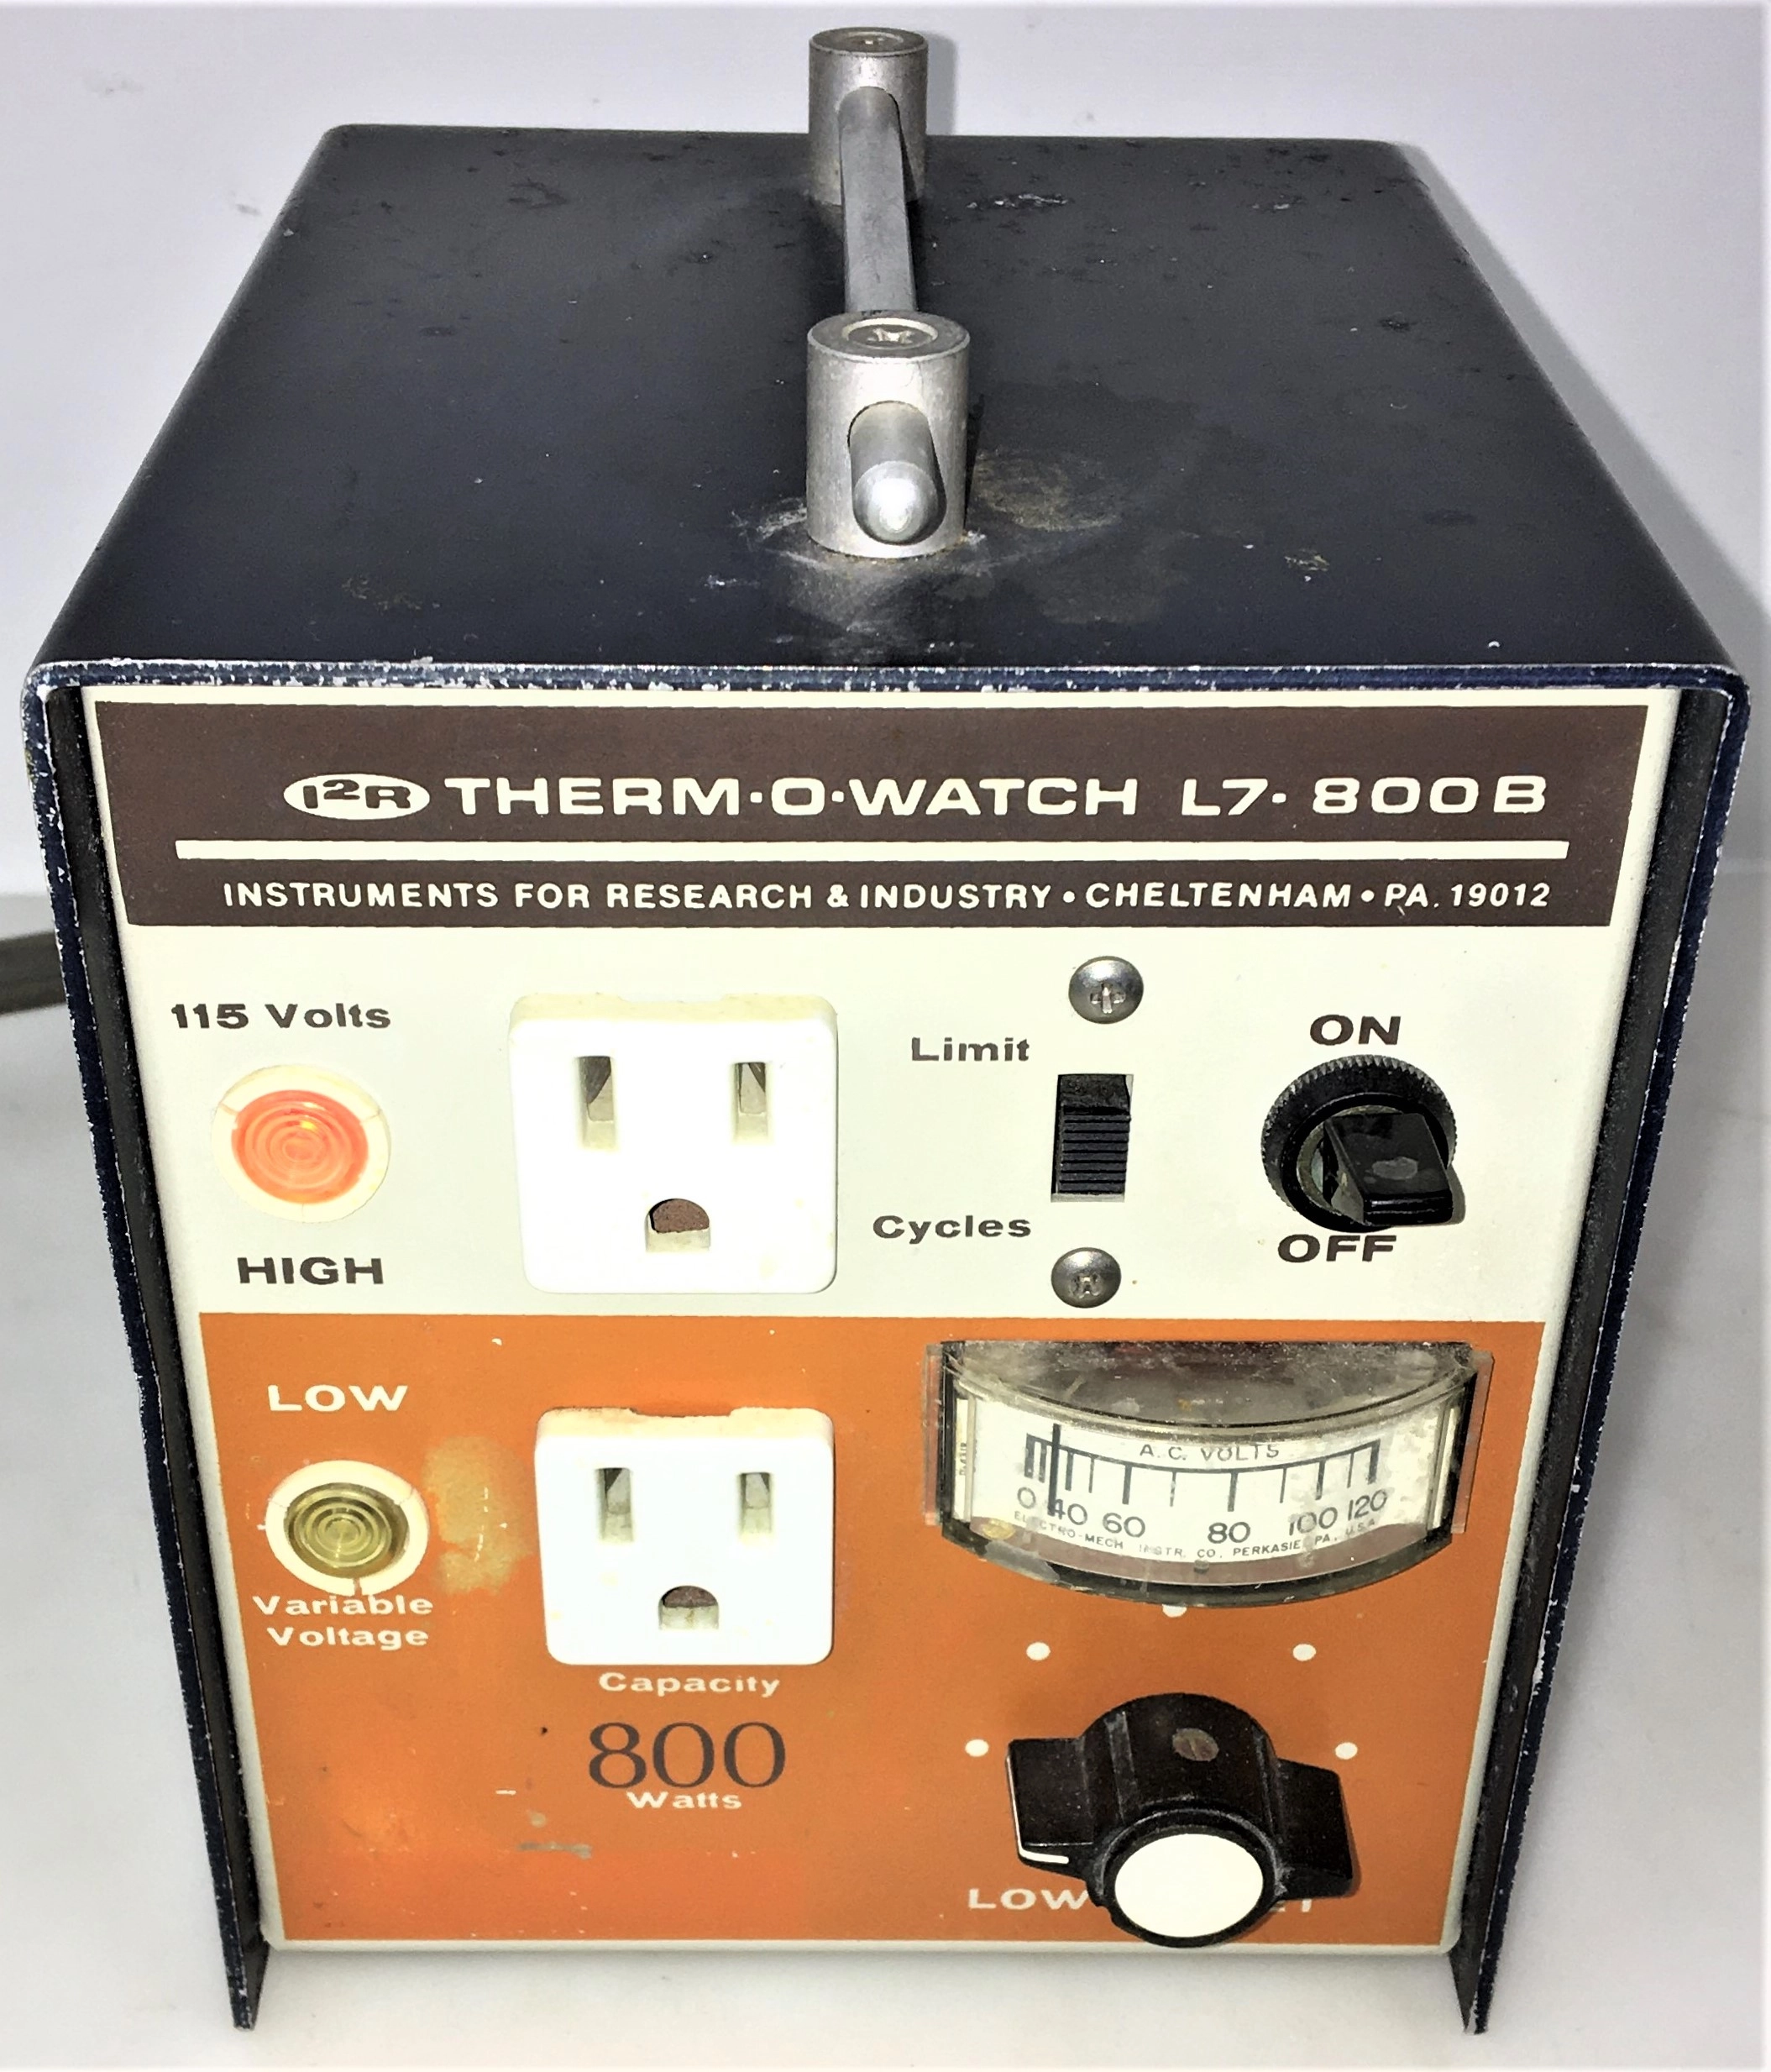 I2R Therm-O-Watch L7-800B Temperature Controller